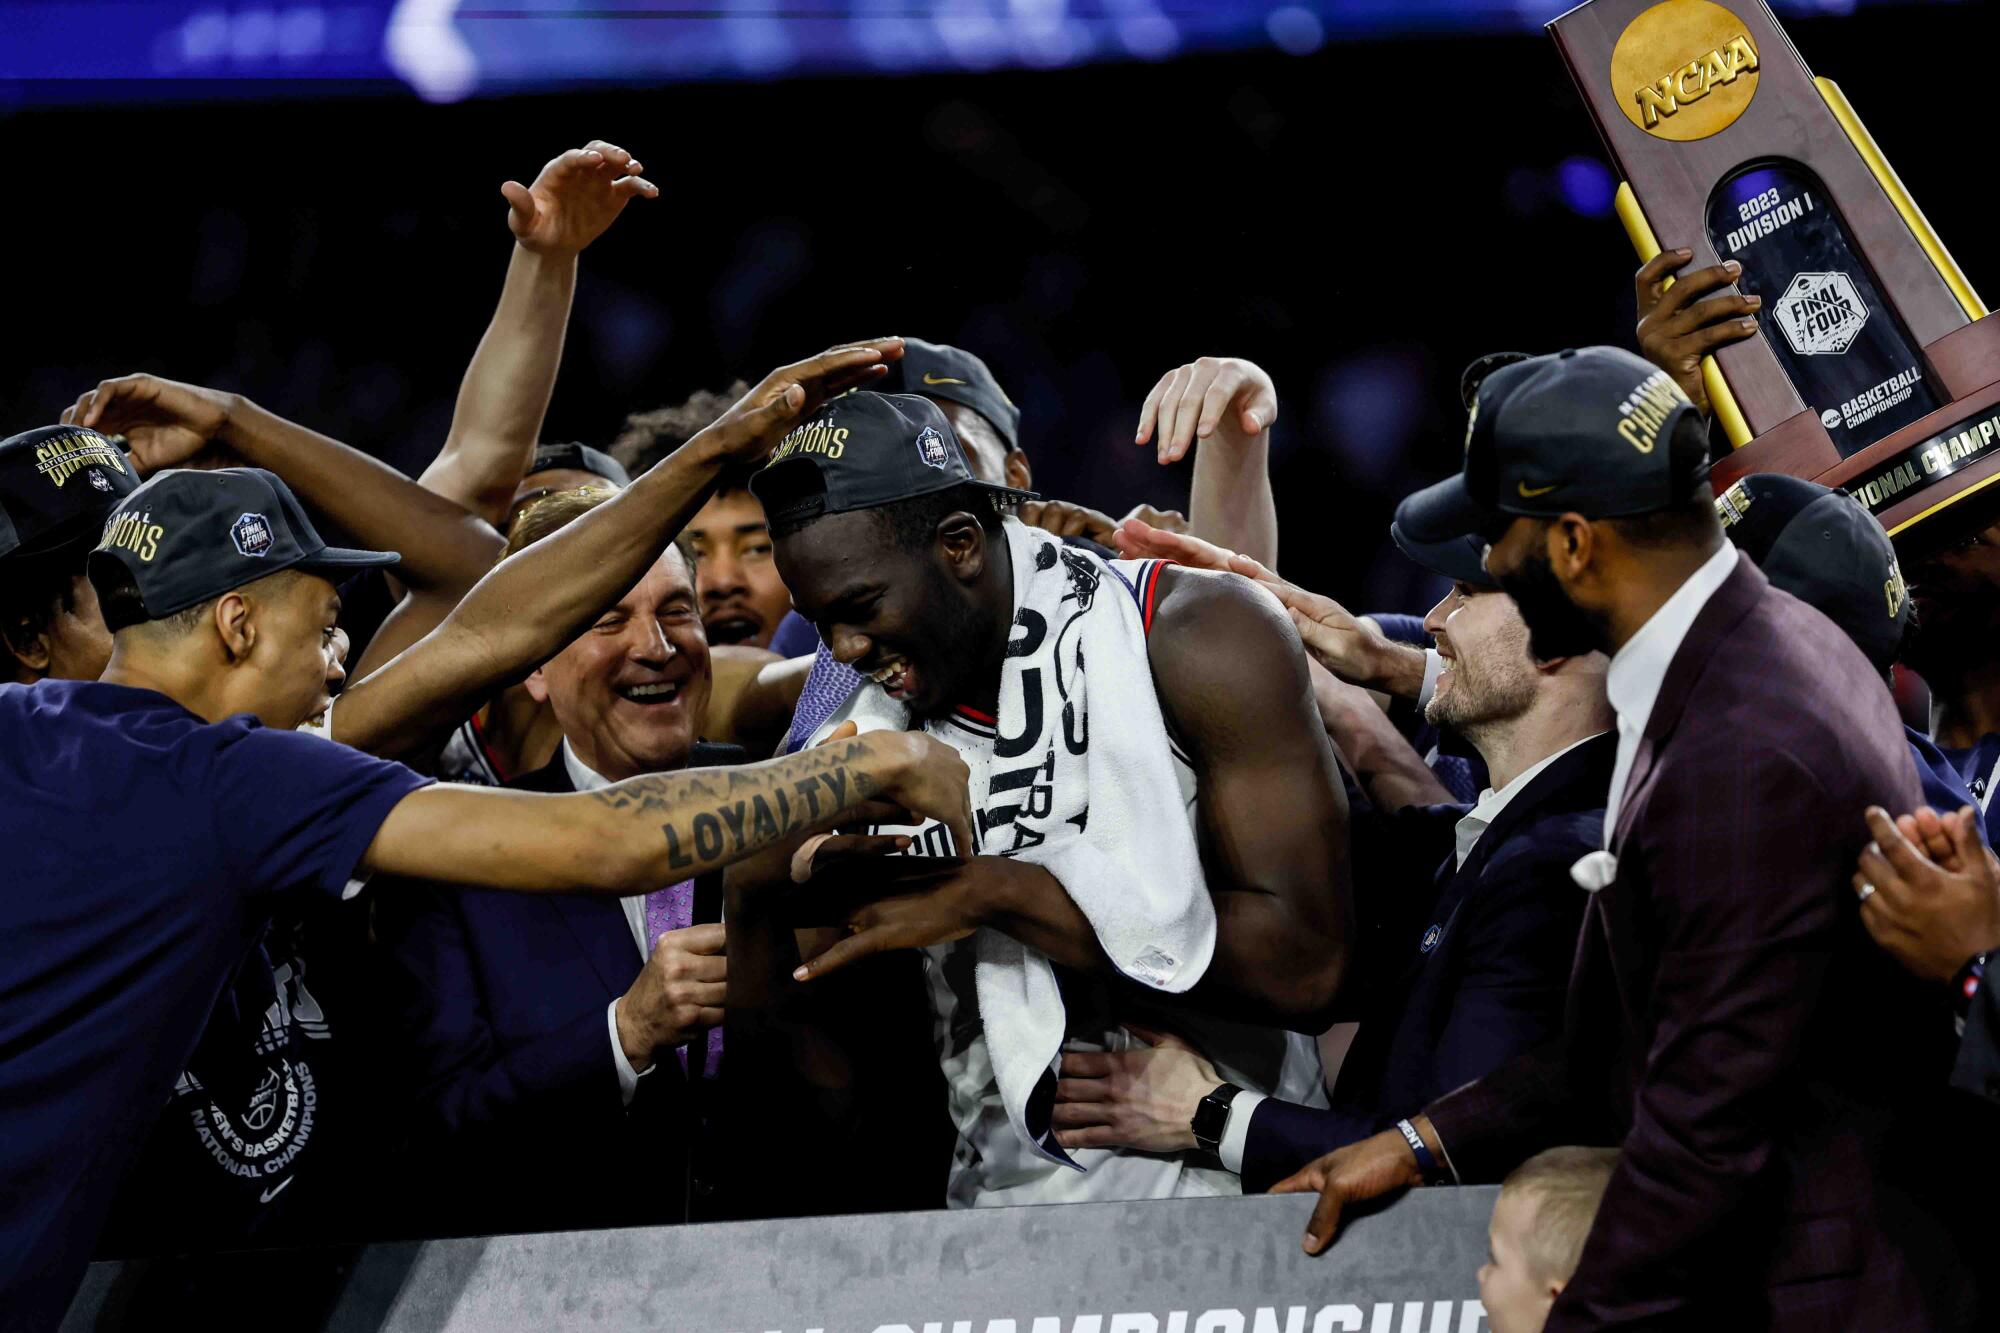 Connecticut celebrates after beating San Diego State for Monday night's national championship.